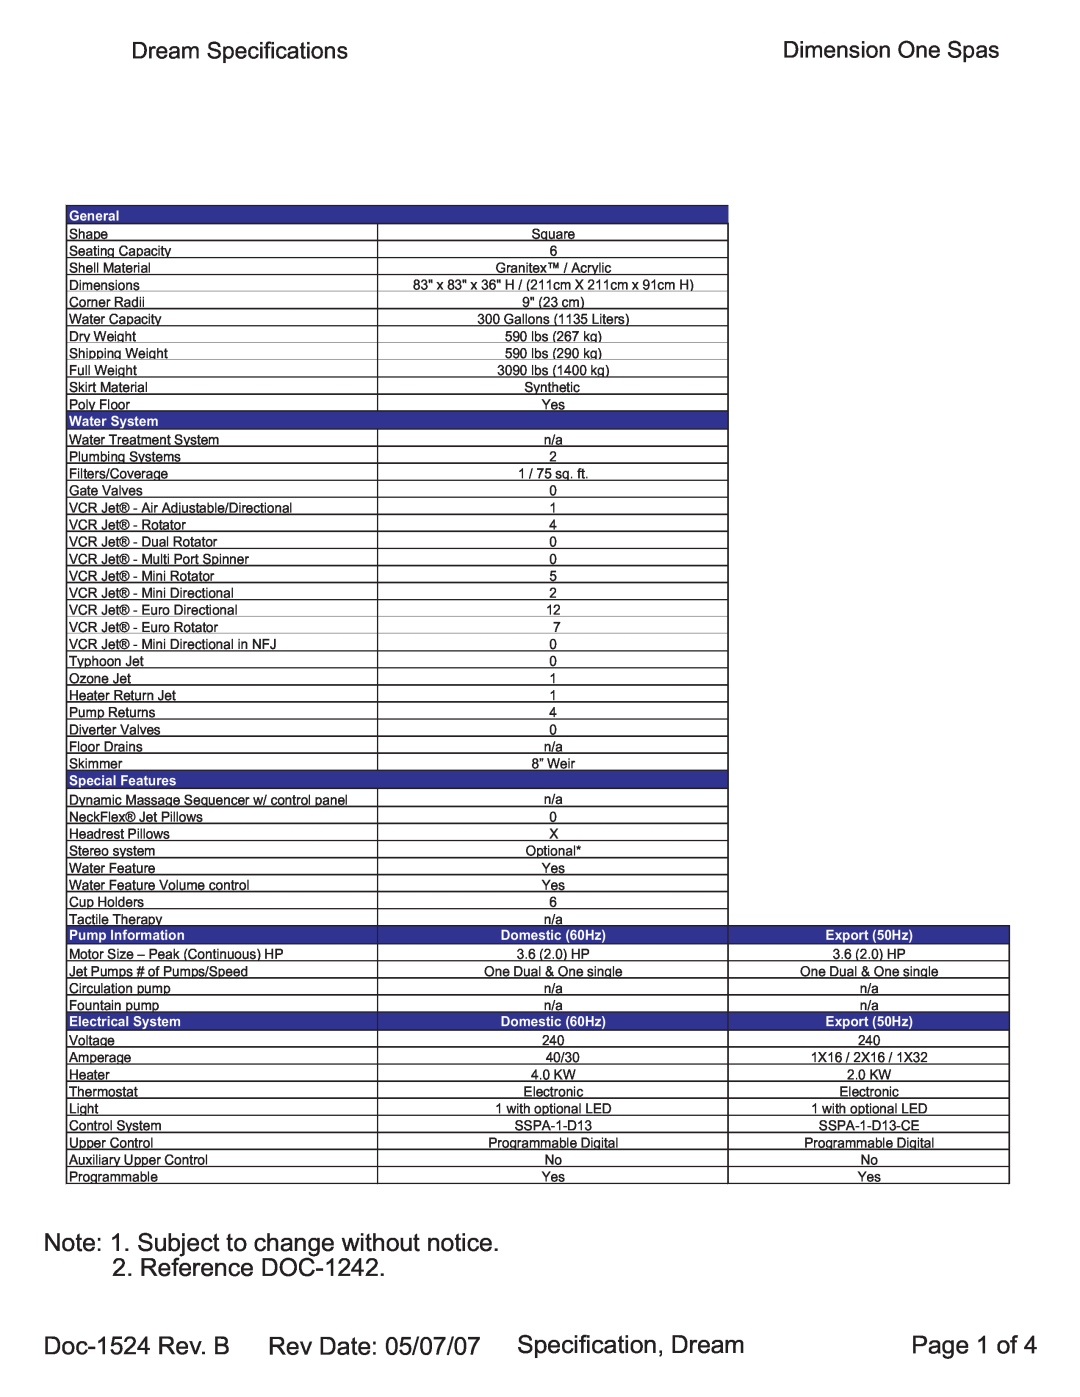 Dimension One Spas specifications Page 1 of, Dream Specifications, Dimension One Spas 